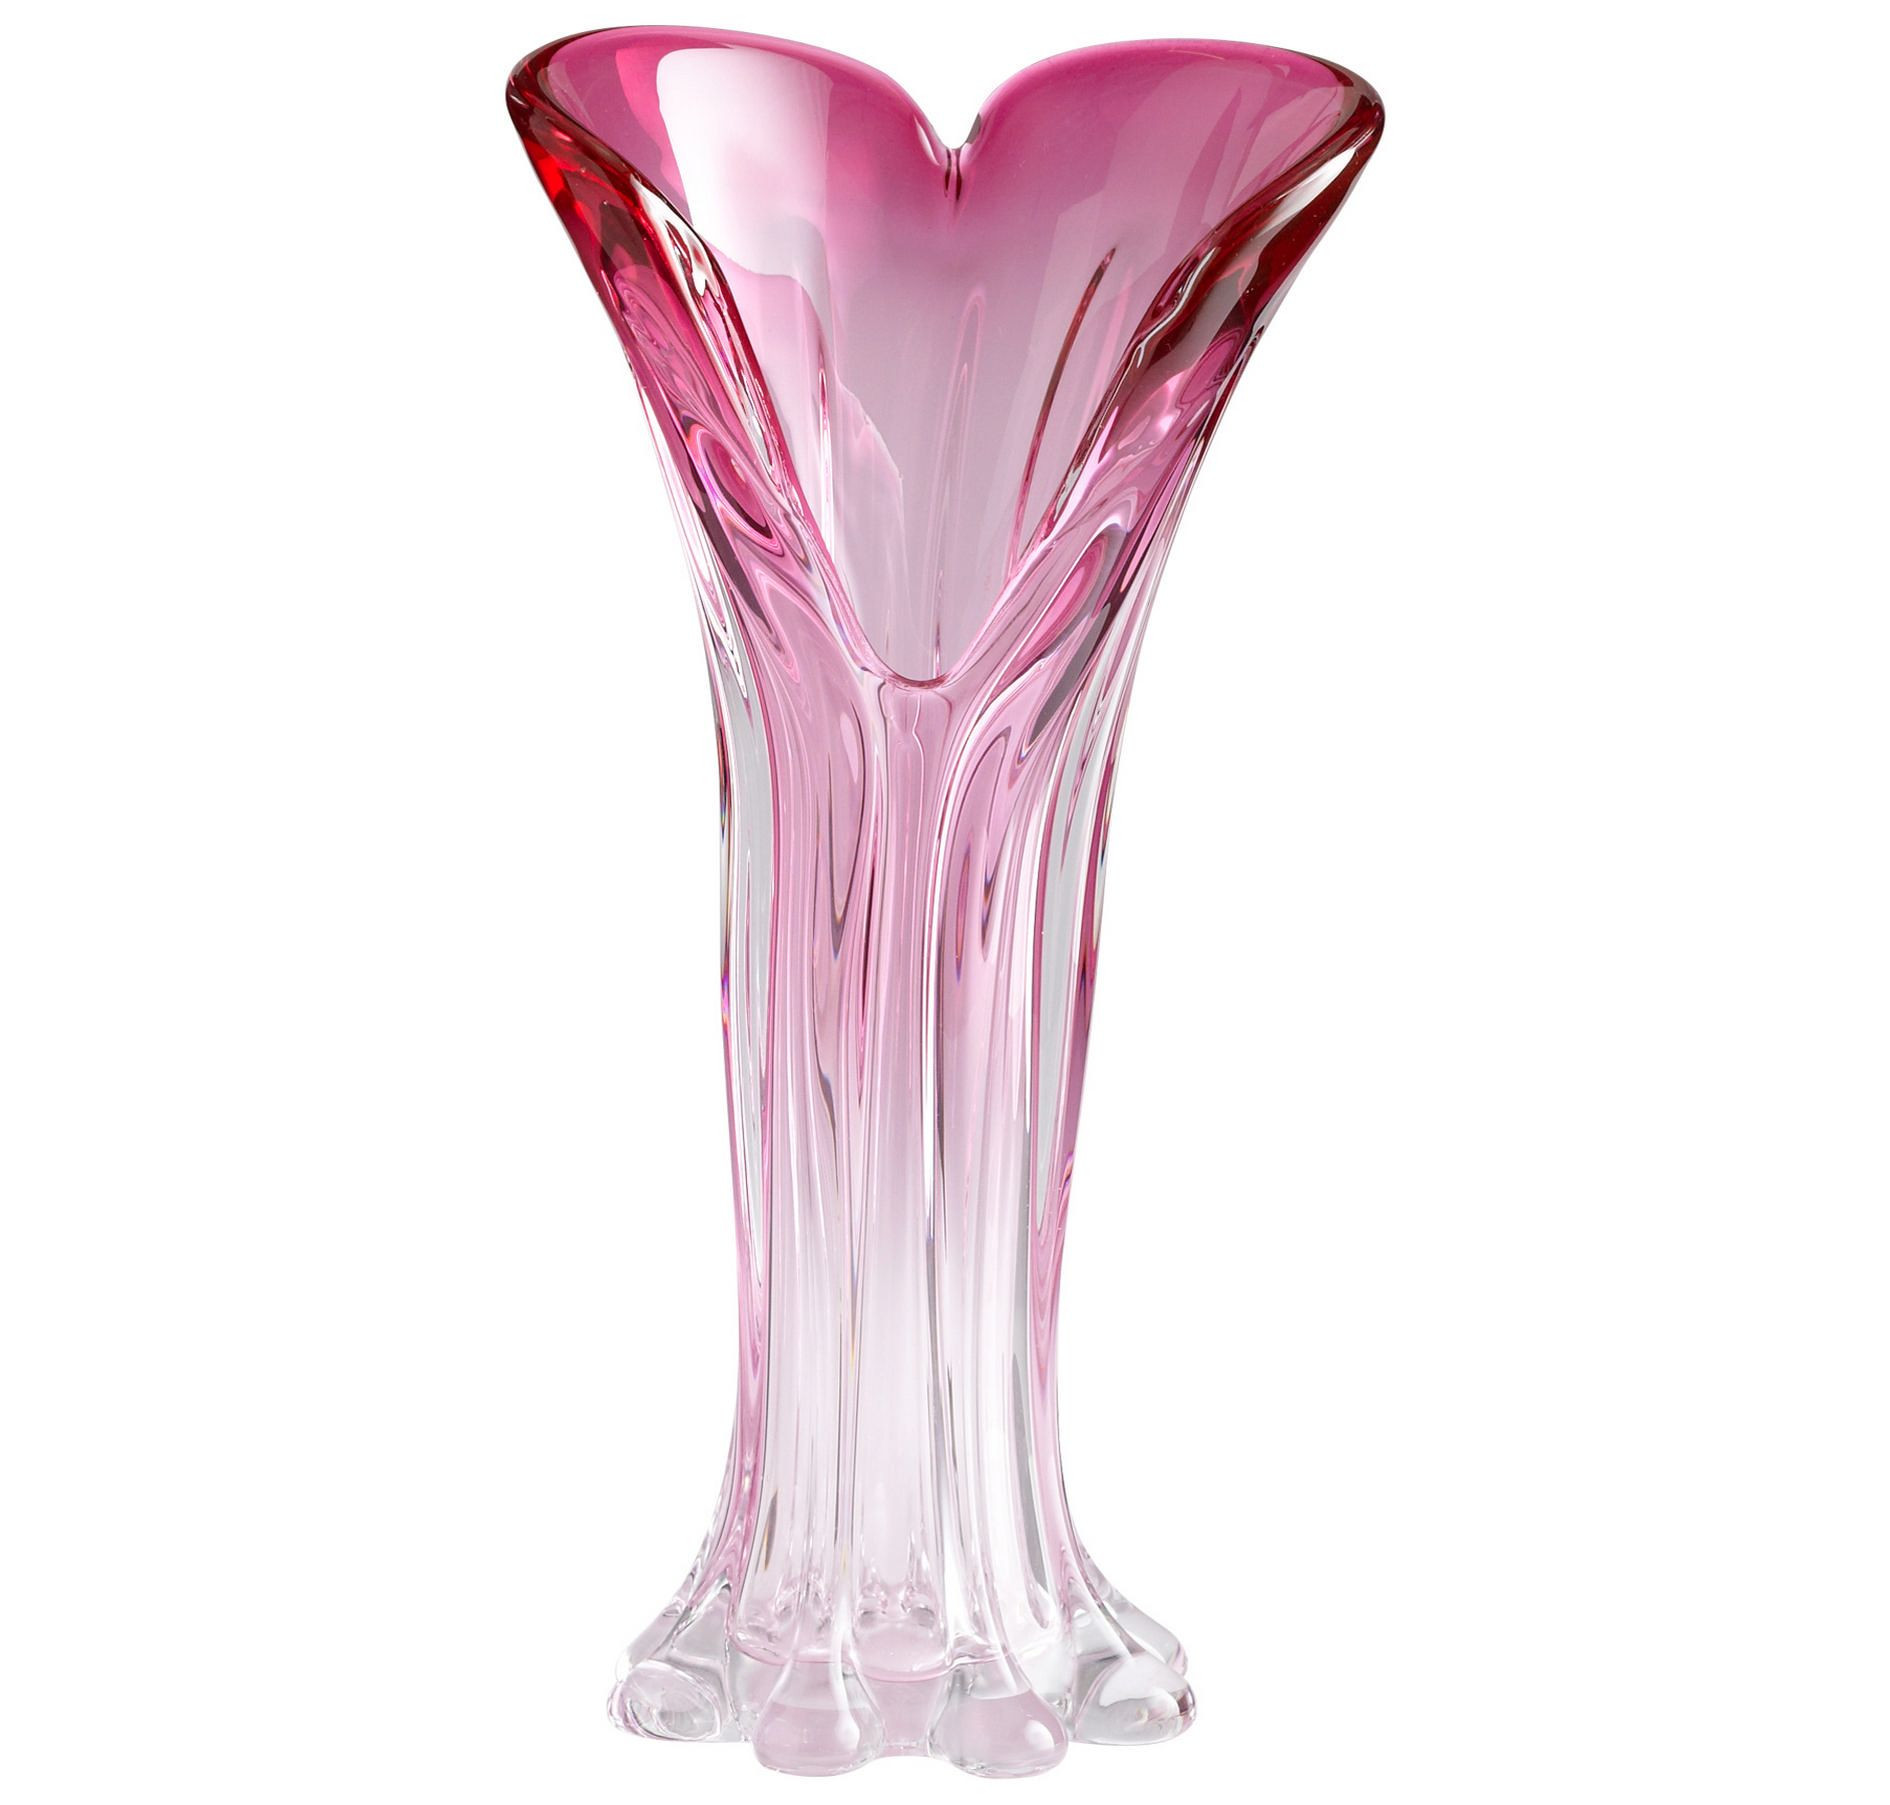 28 Fantastic Large Waterford Vase 2024 free download large waterford vase of cyan design 05388 large cuore vase in pink finish in home decor intended for cyan design 05388 large cuore vase in pink finish in home decor vases urns